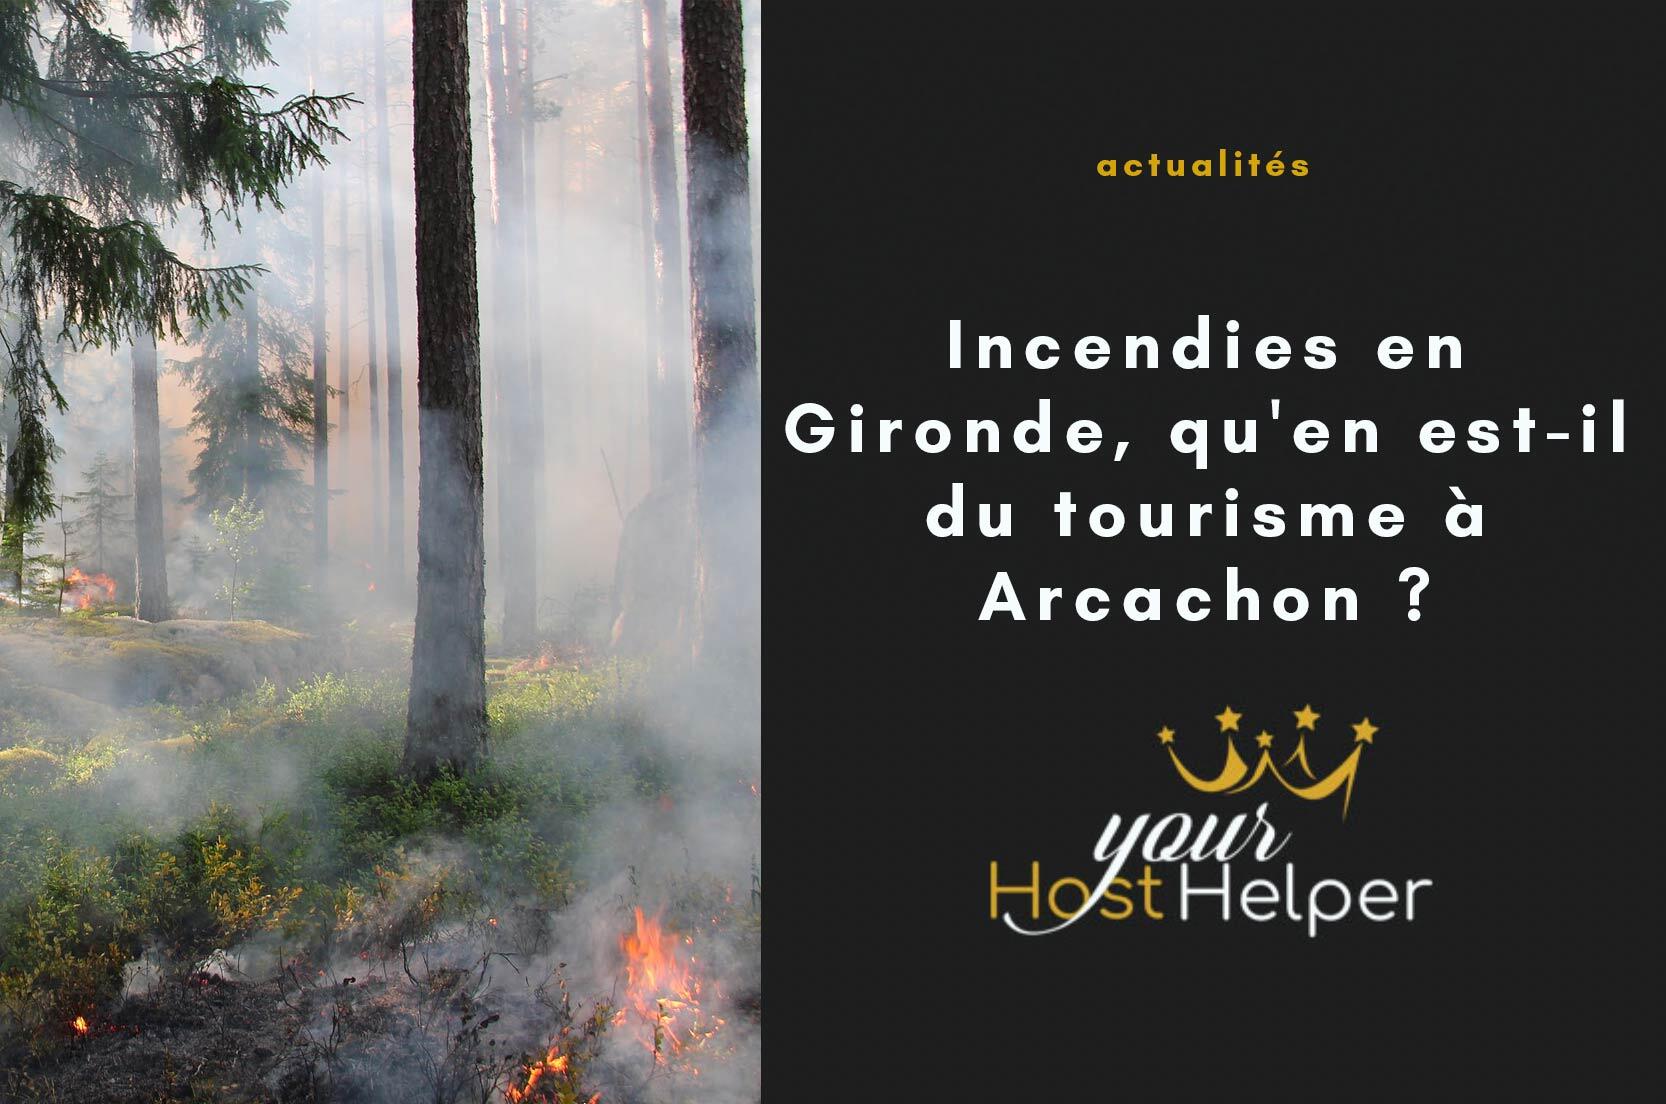 You are currently viewing The fires in Gironde seen by our Airbnb concierge in Arcachon